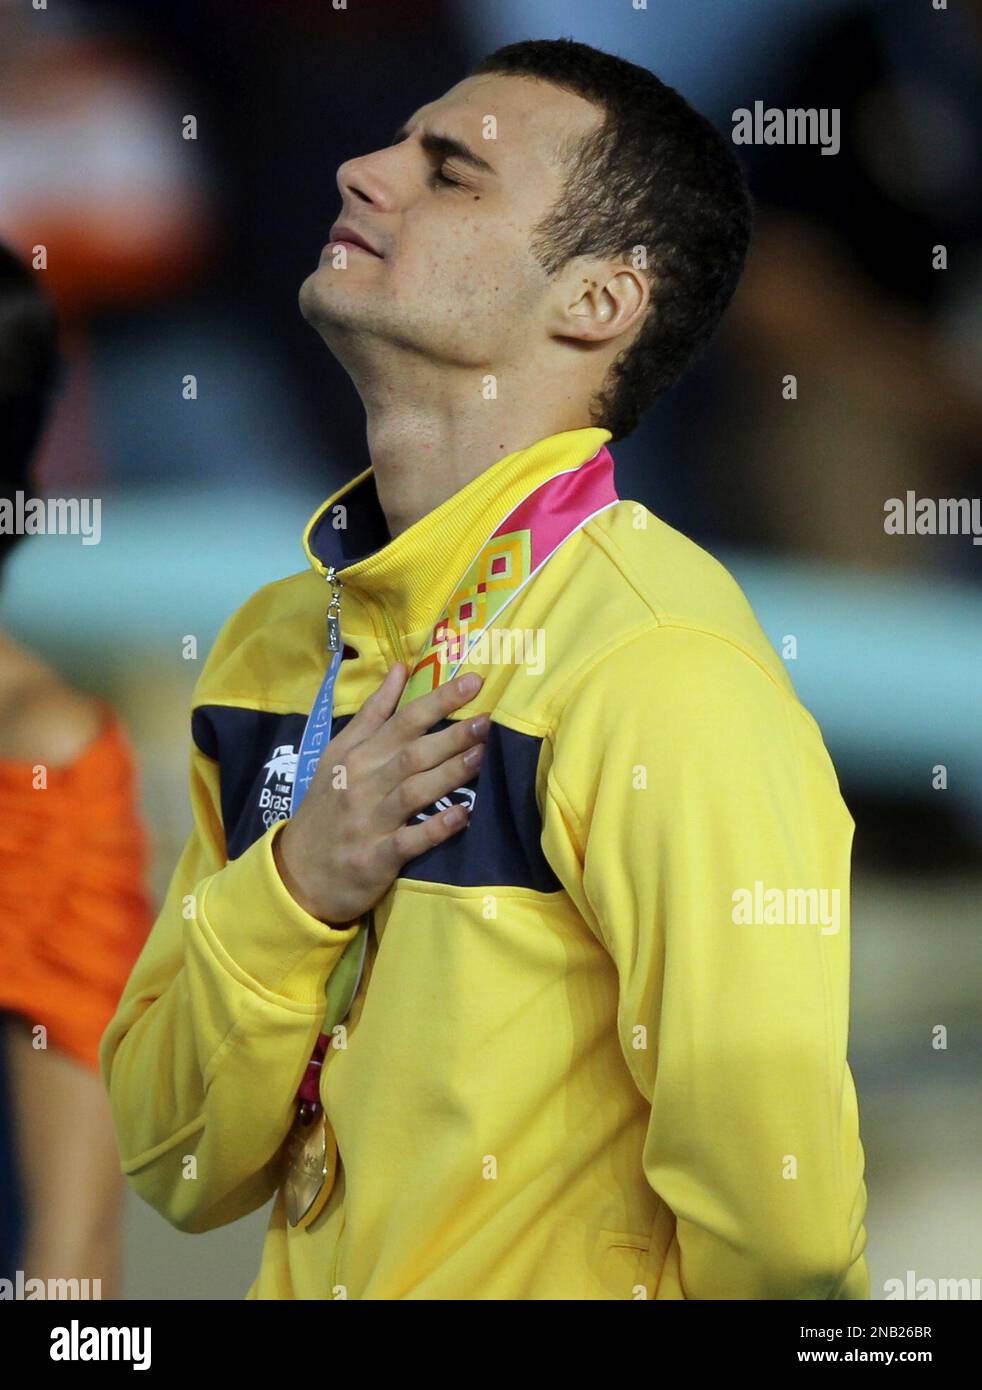 Brazil's Leonardo De Deus celebrates at the podium after winning the gold medal for the men's 200m backstroke at the Pan American Games in Guadalajara, Mexico, Monday, Oct. 17, 2011. De Deus was initially disqualified, according to Brazilian officials because of the sponsor’s logo on his swim cap, and then reinstated as the gold medalist after an appeal.(AP Photo/Silvia Izquierdo) Stock Photo